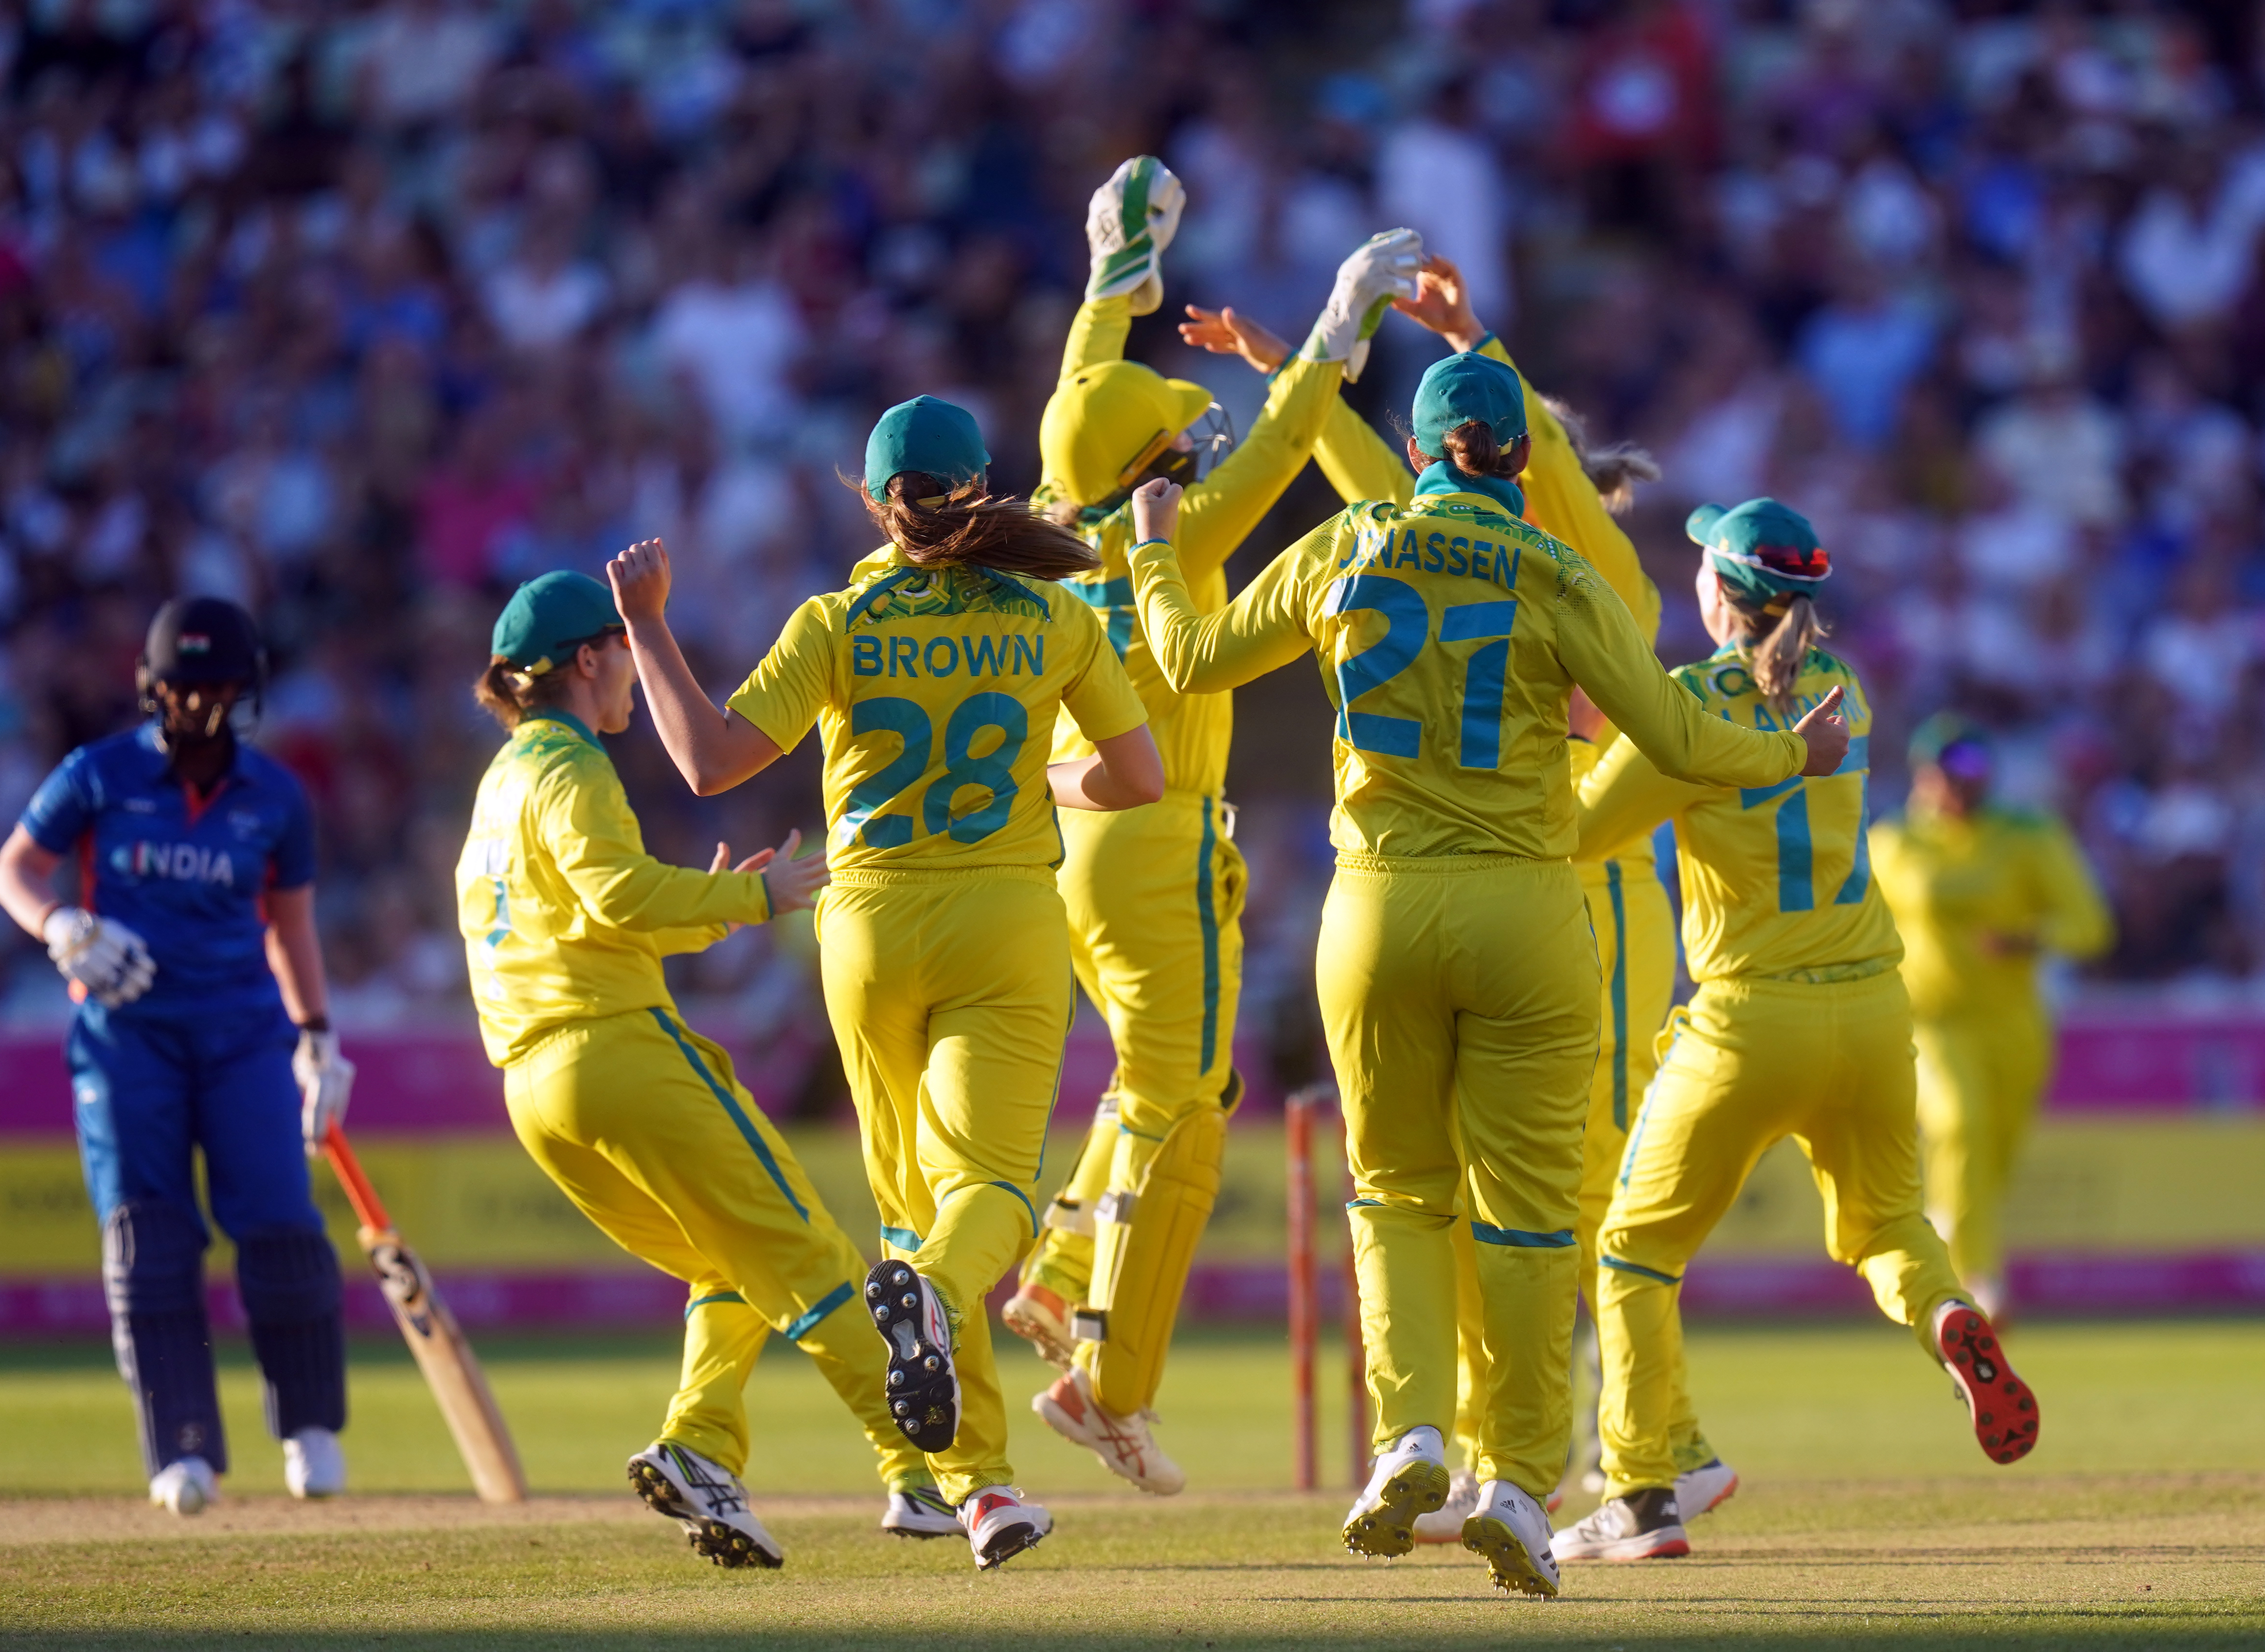 Cricket was played at the 2022 Commonwealth Games